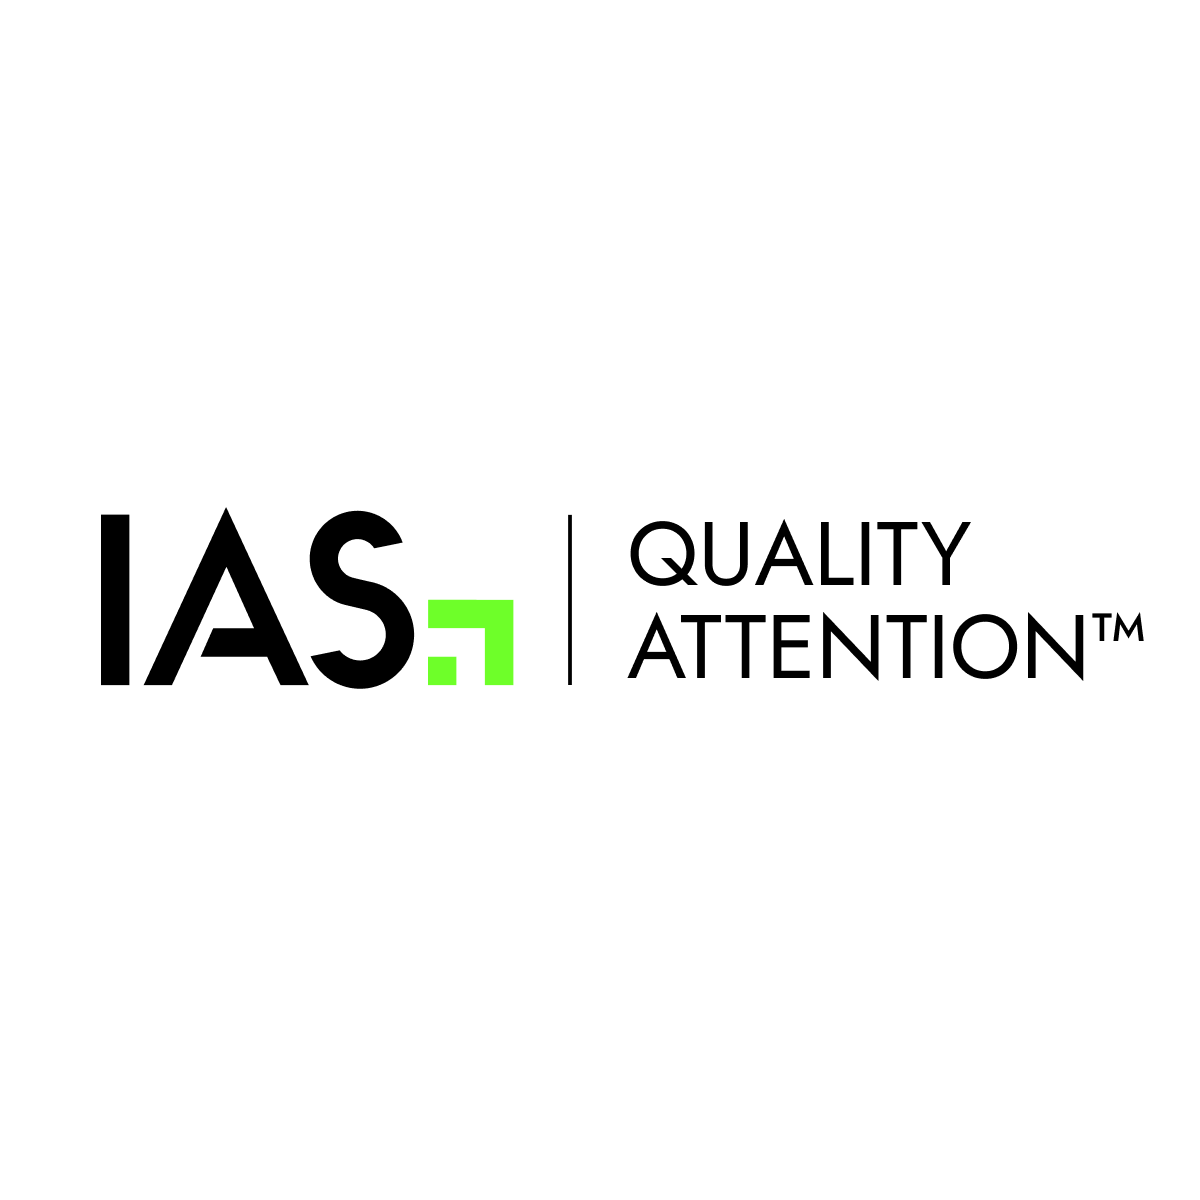 IAS announces new Quality Attention product.